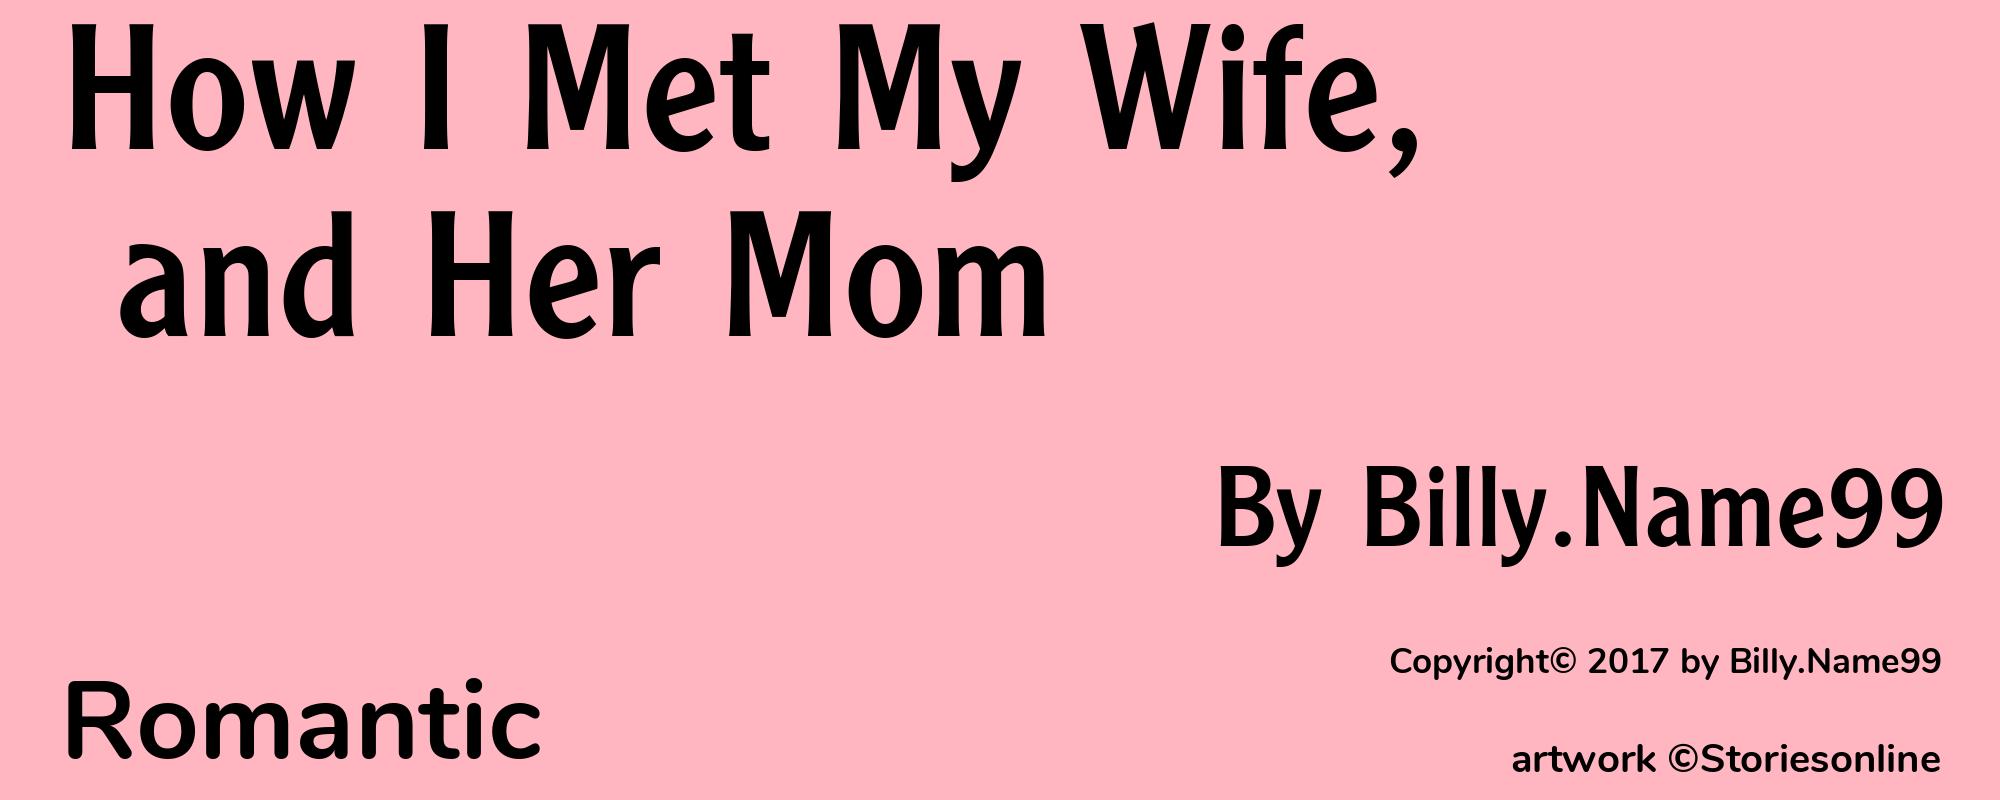 How I Met My Wife, and Her Mom - Cover